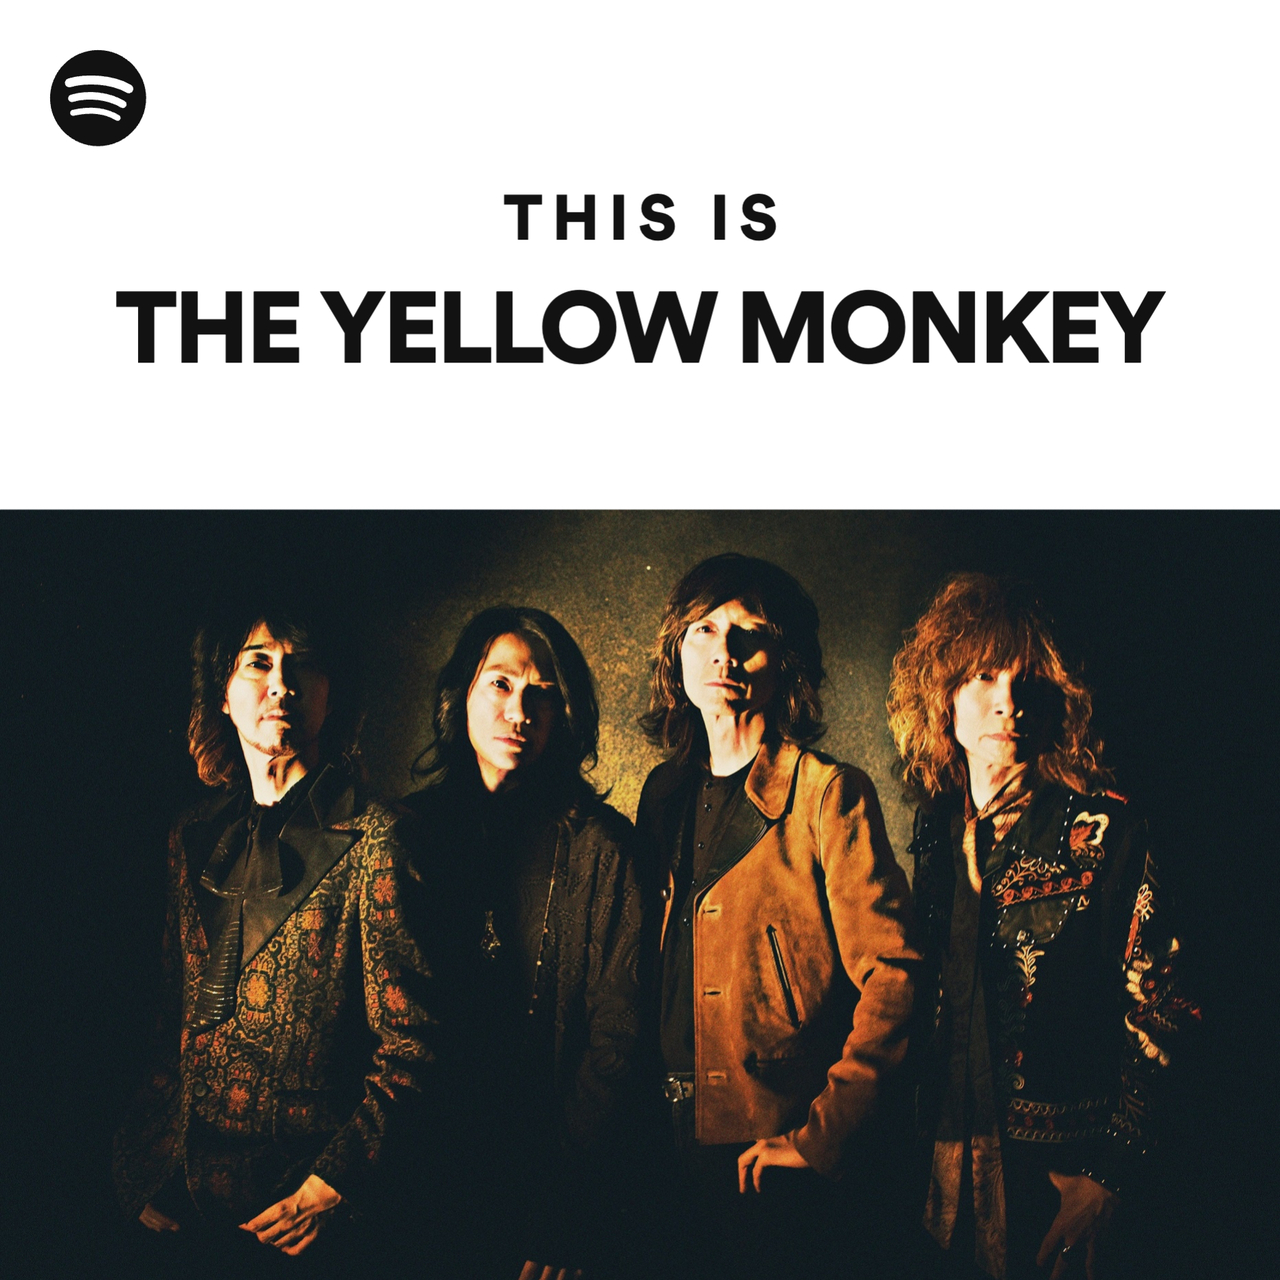 This Is THE YELLOW MONKEY - playlist by Spotify | Spotify